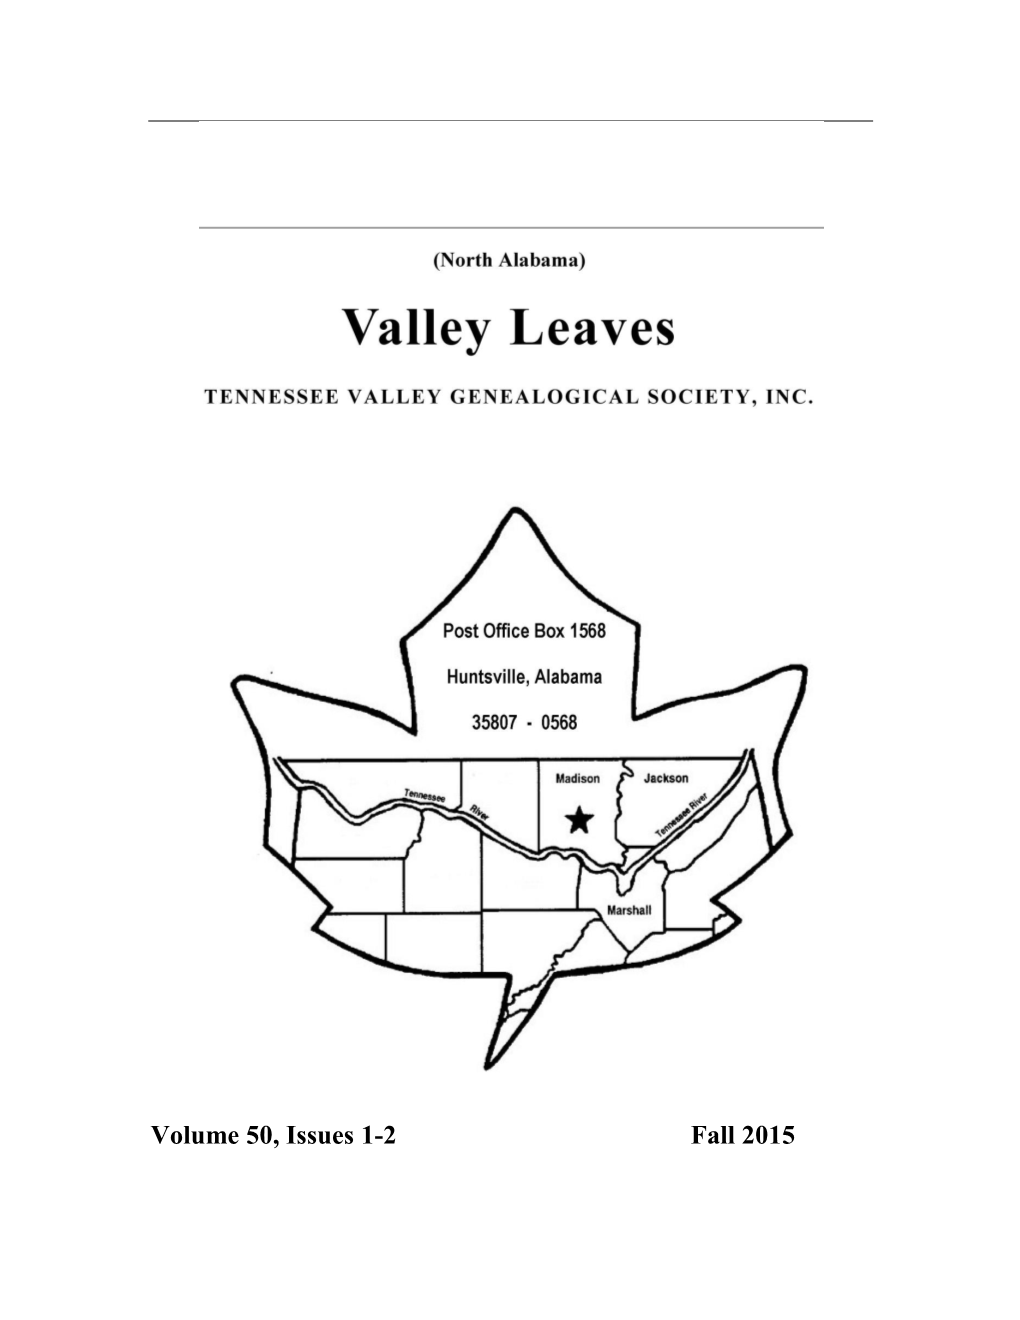 Volume 50, Issues 1-2 Fall 2015